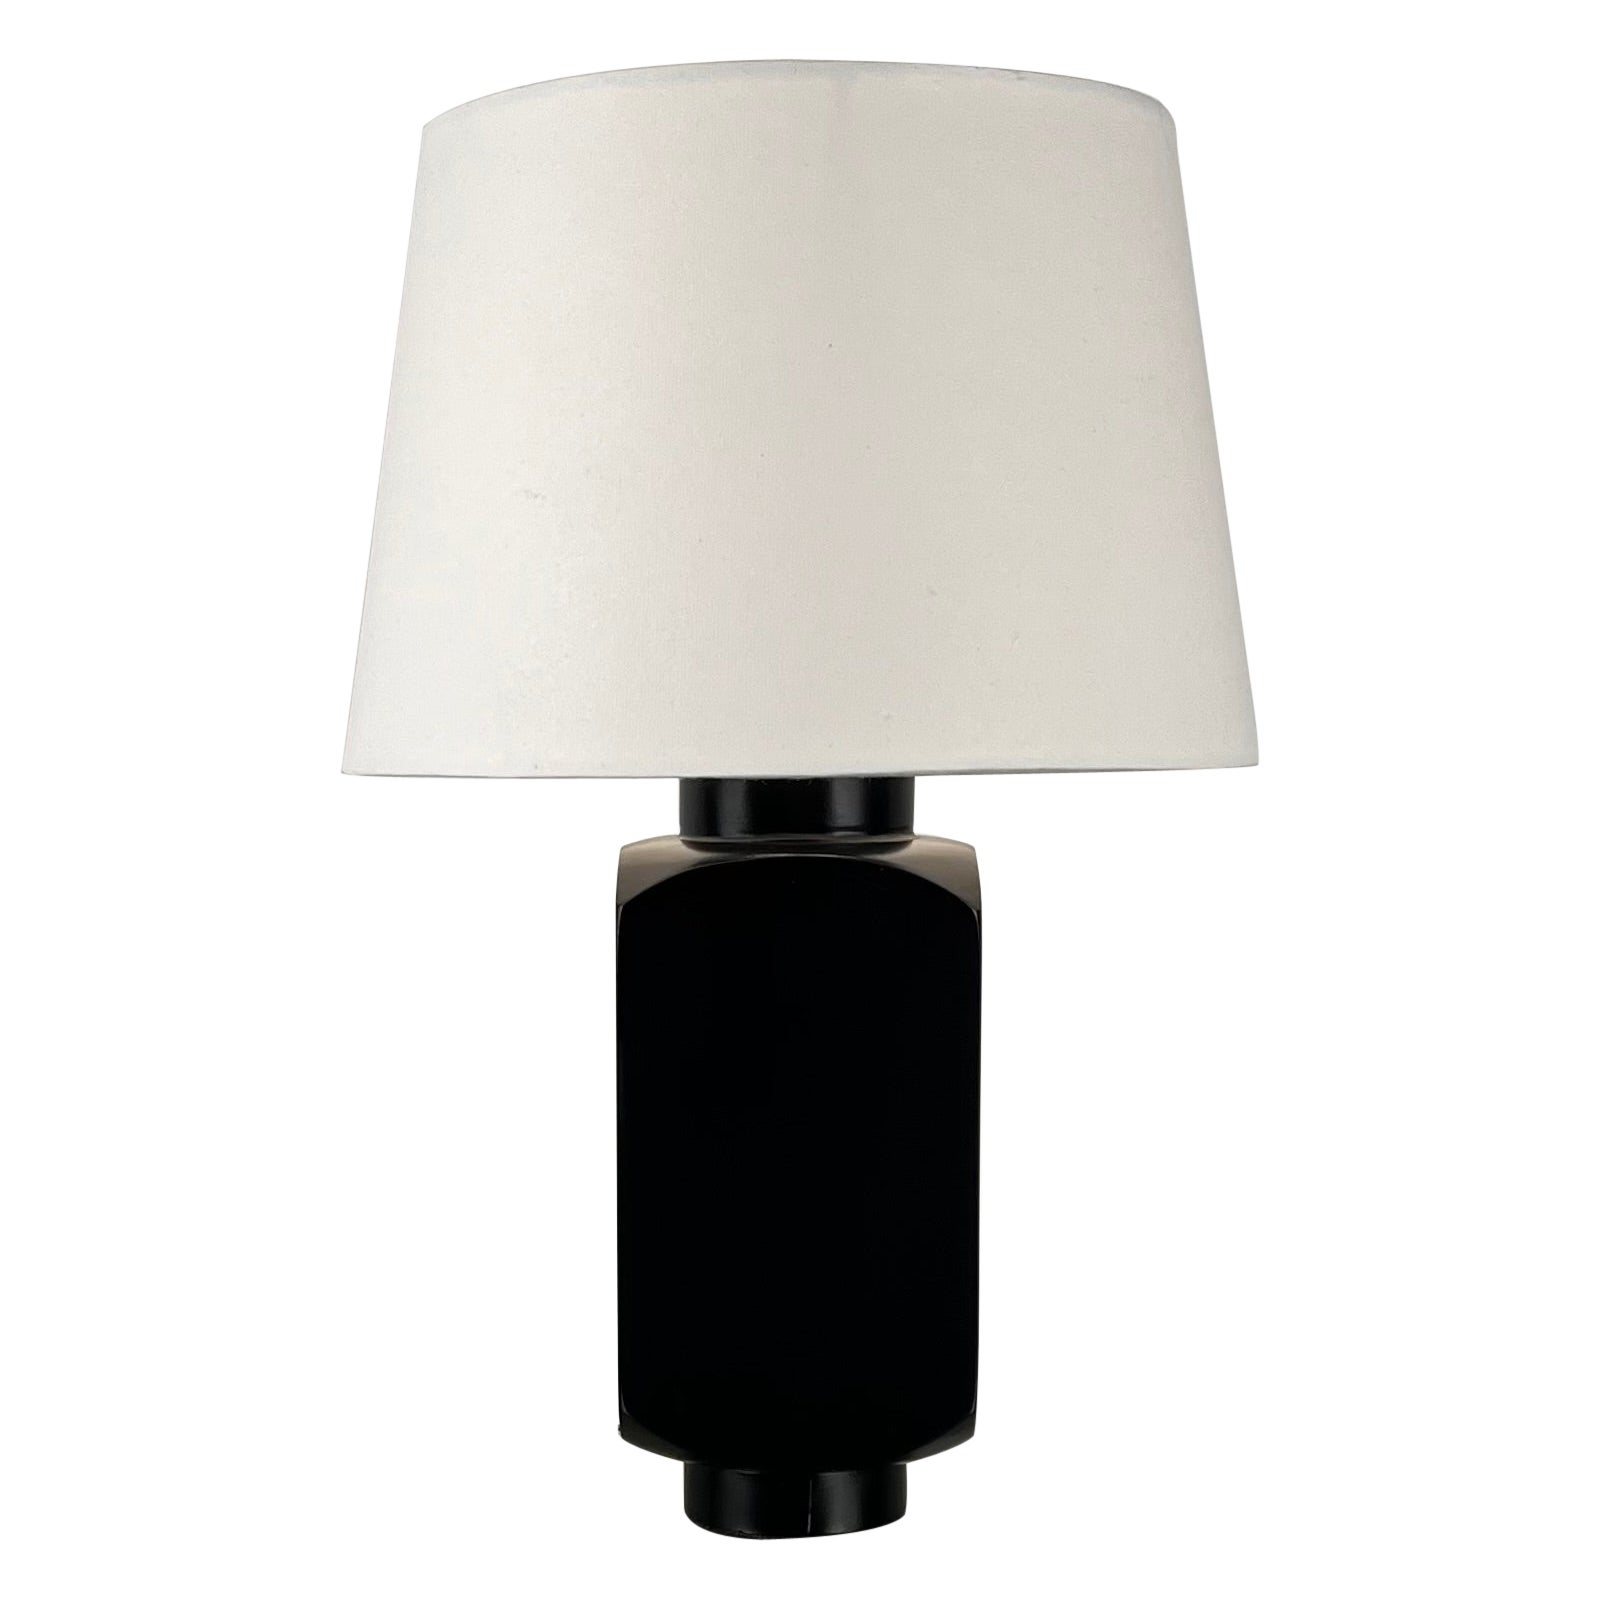 'Ébène' Table Lamp with Parchment Shade by Design Frères For Sale